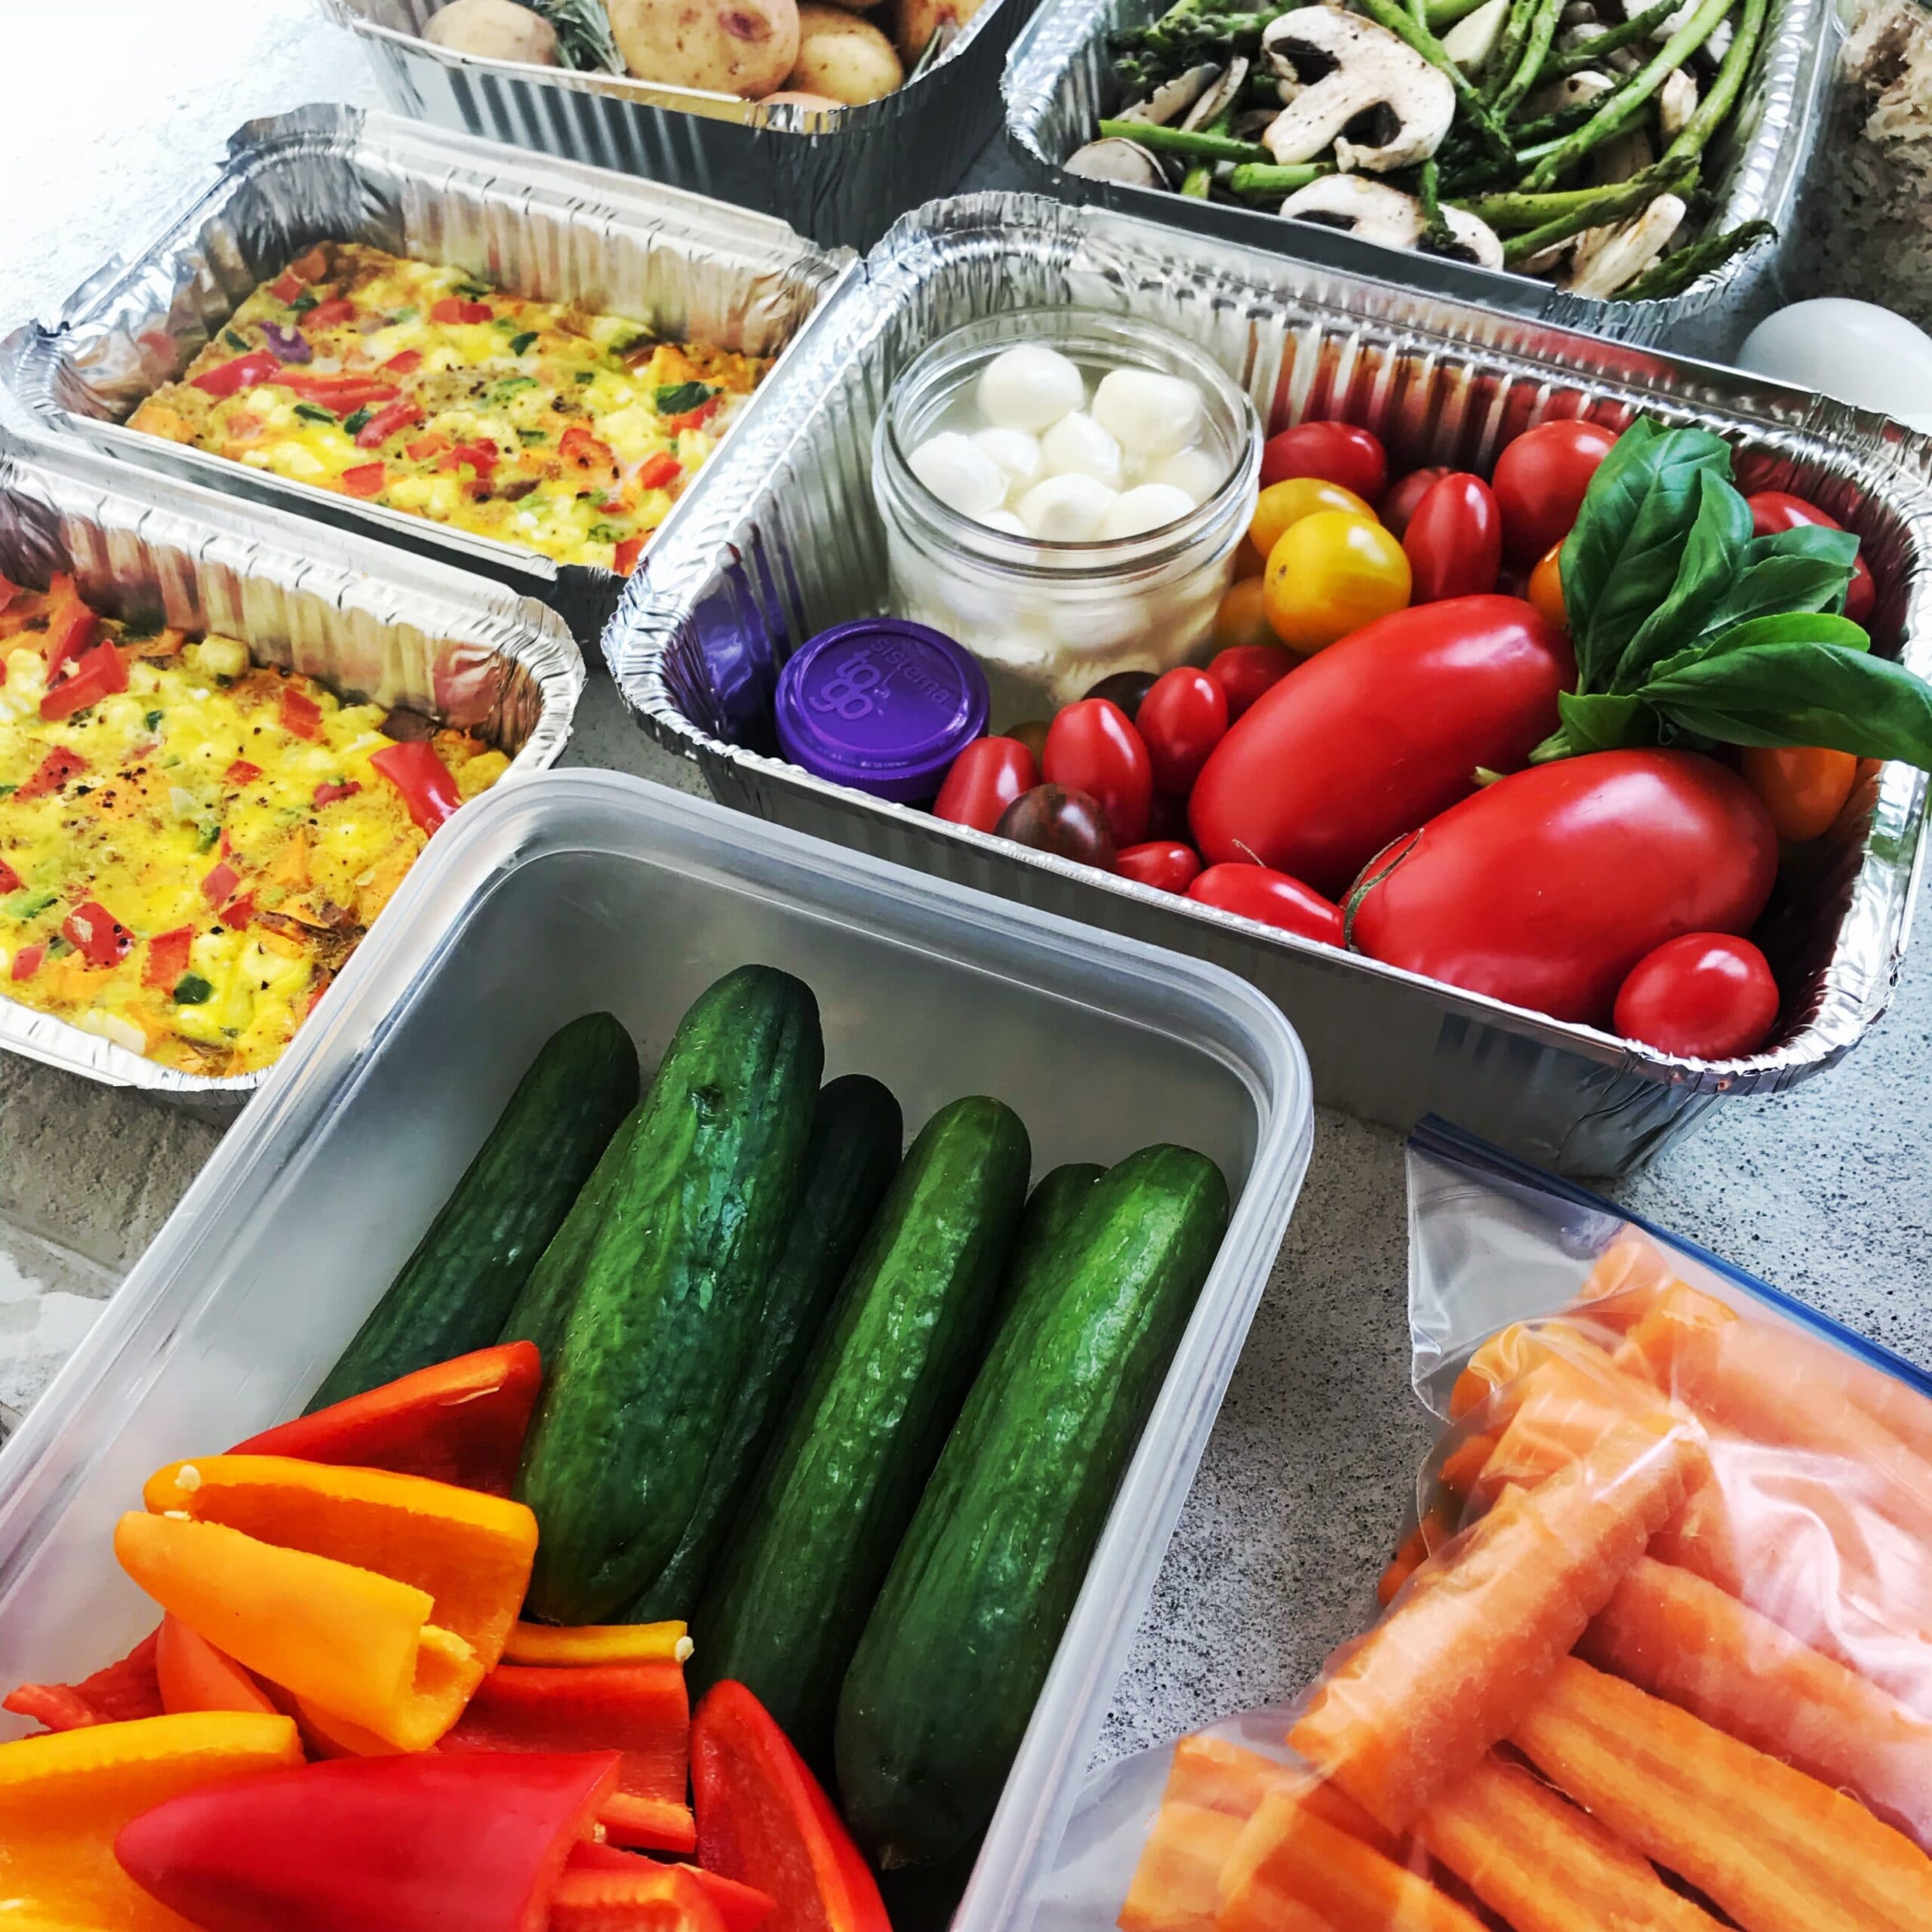 The best meal planning and prep tips for Camping